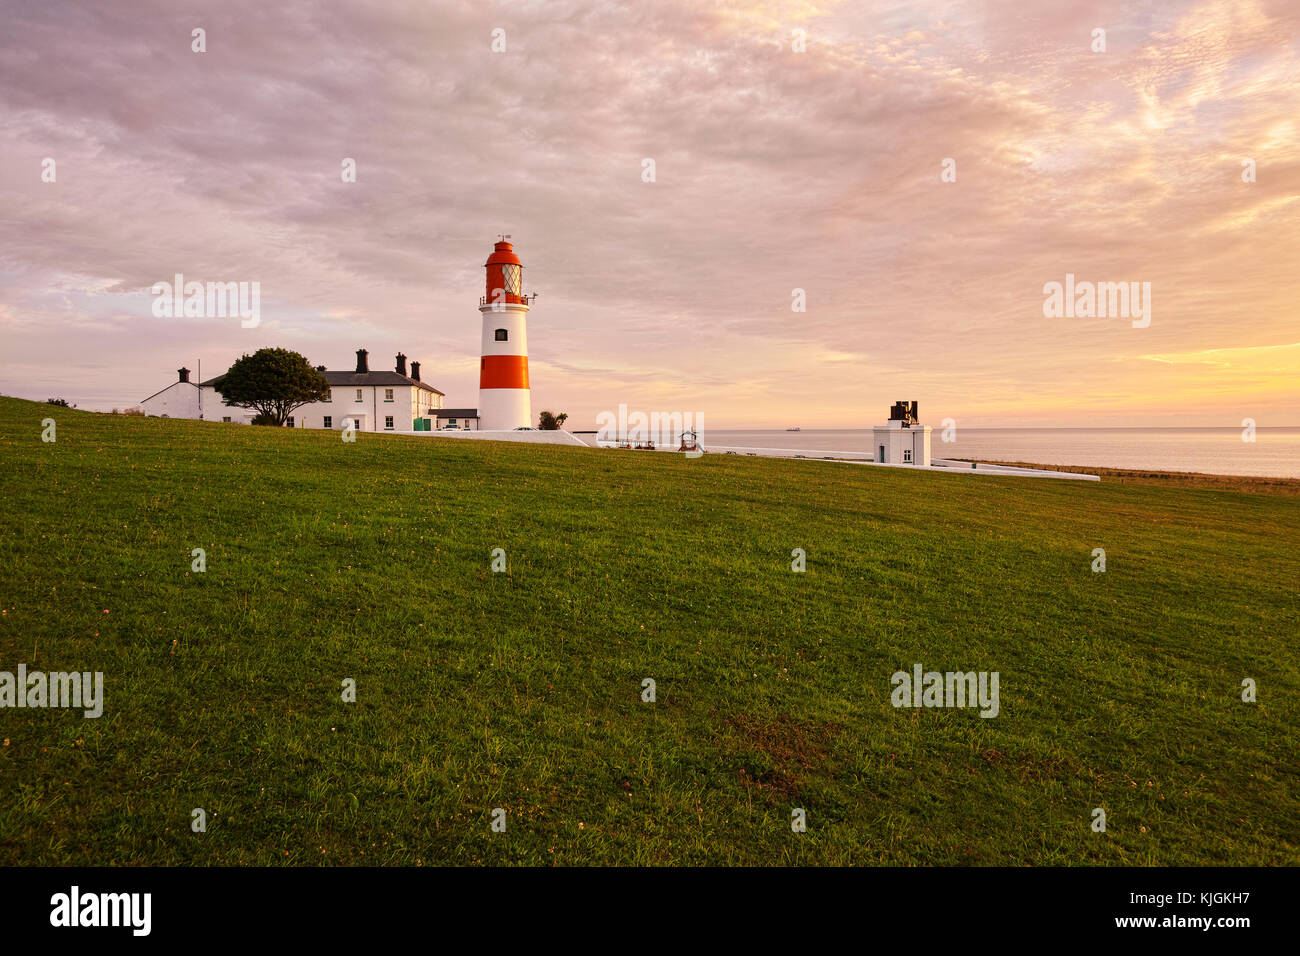 Souter Lighthouse is a lighthouse located in the village of Marsden in South Shields, Tyne & Wear, England. On a summers morning at sunrise.July Stock Photo